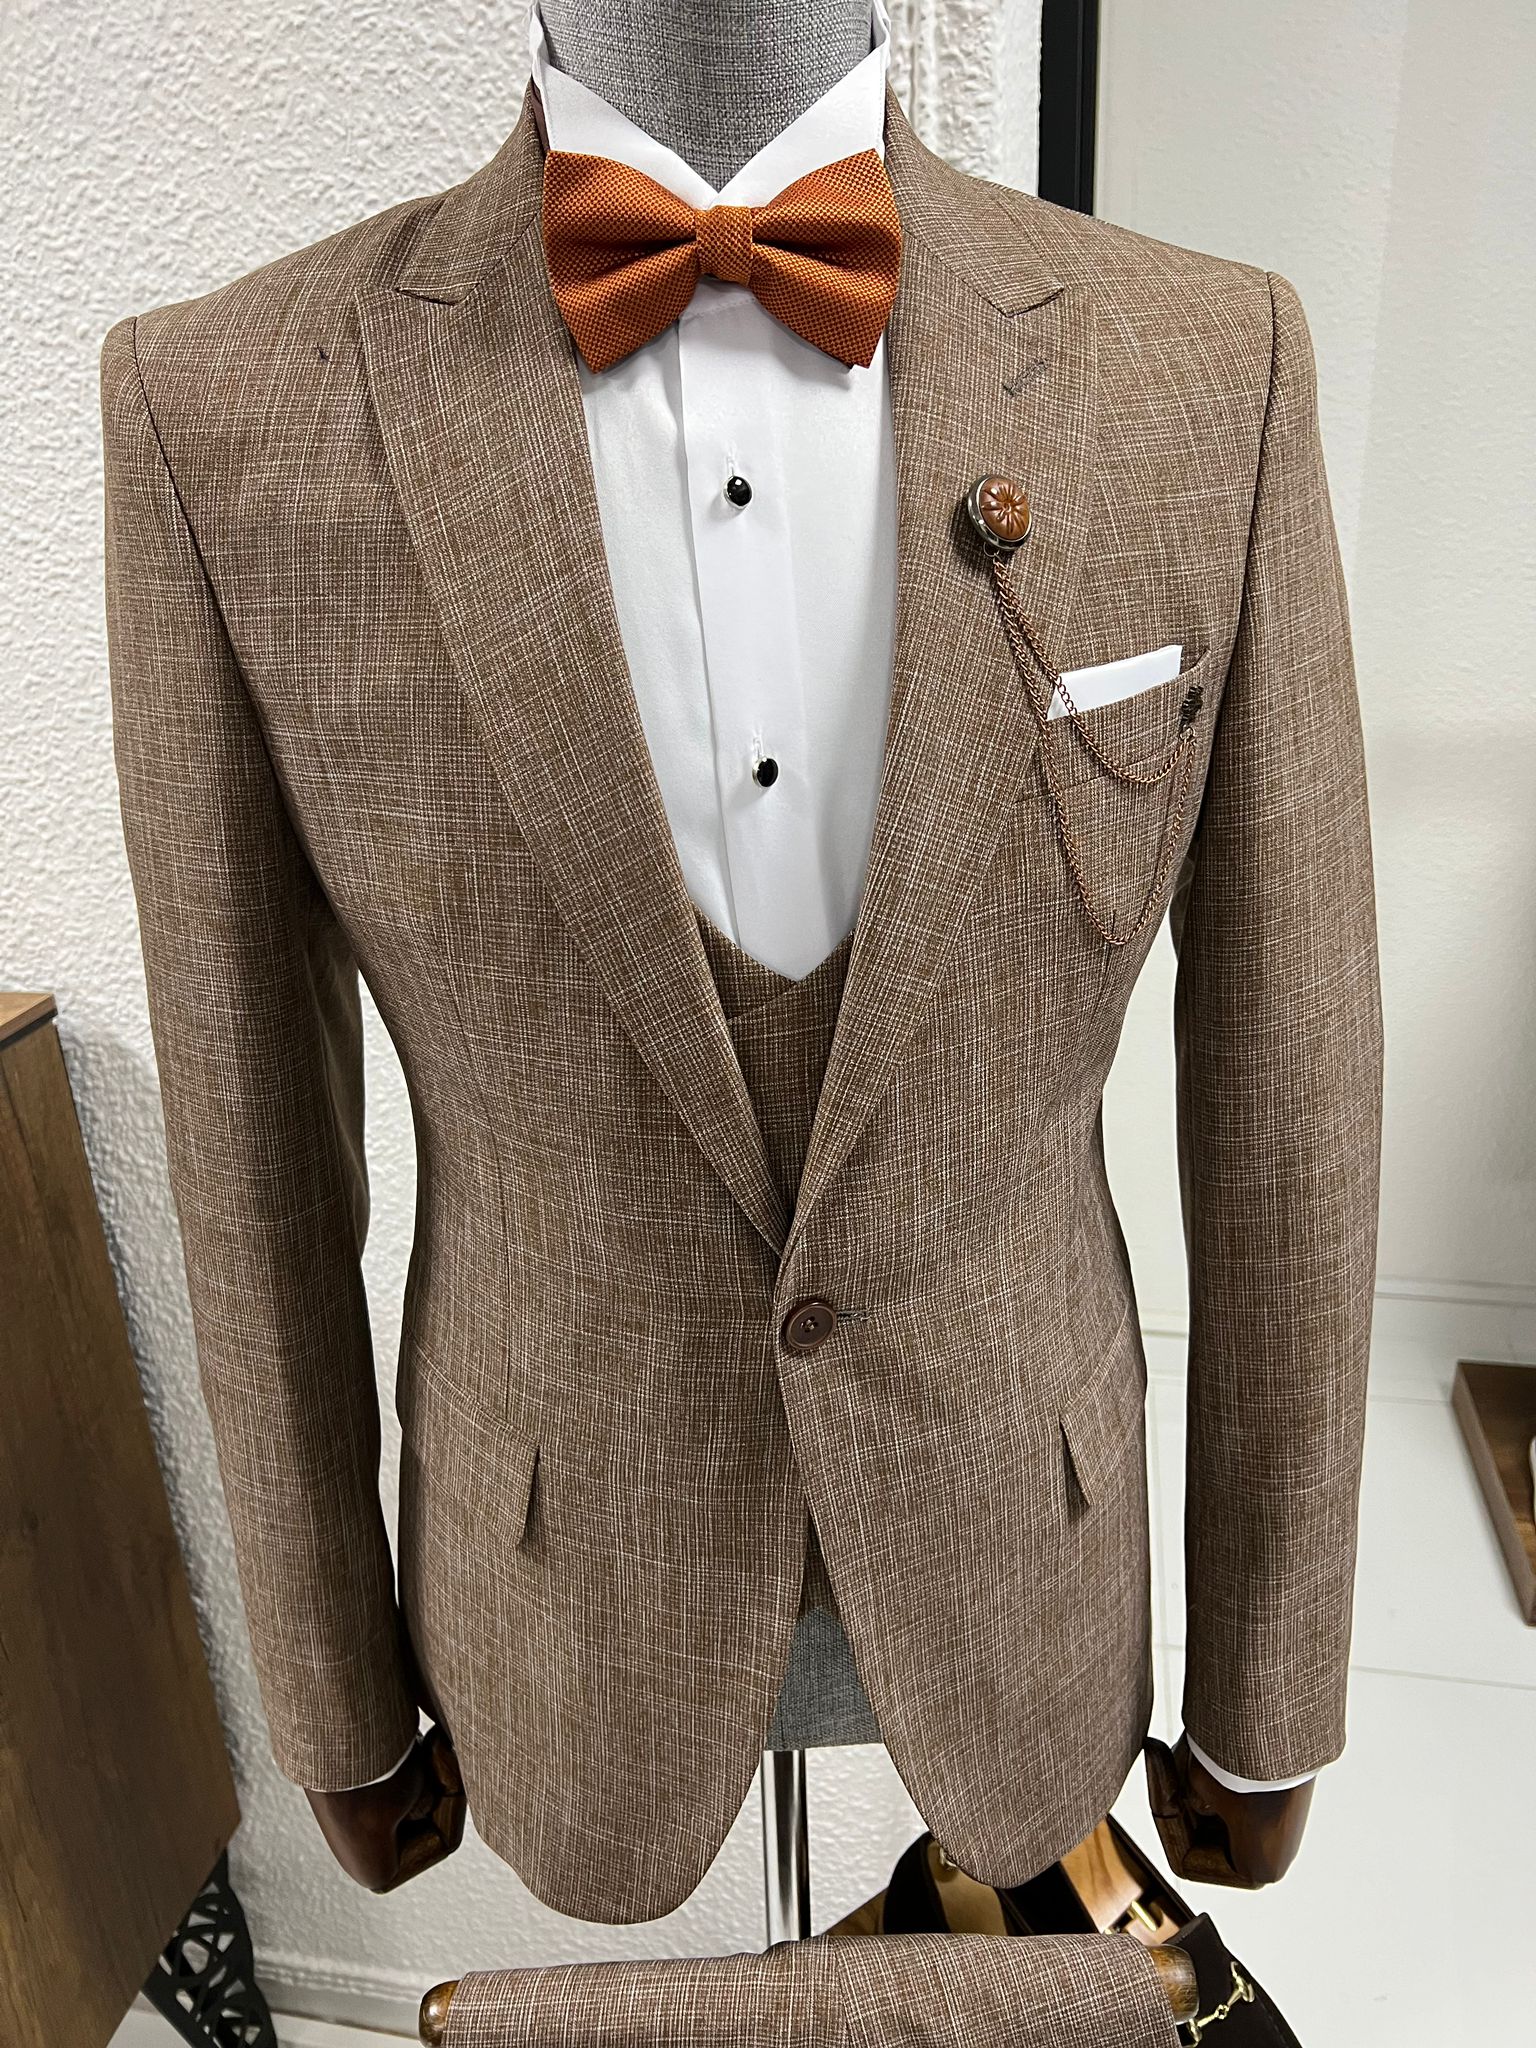 Louis Slim Fit High Quality Pointed Collared Brown Woolen Suit